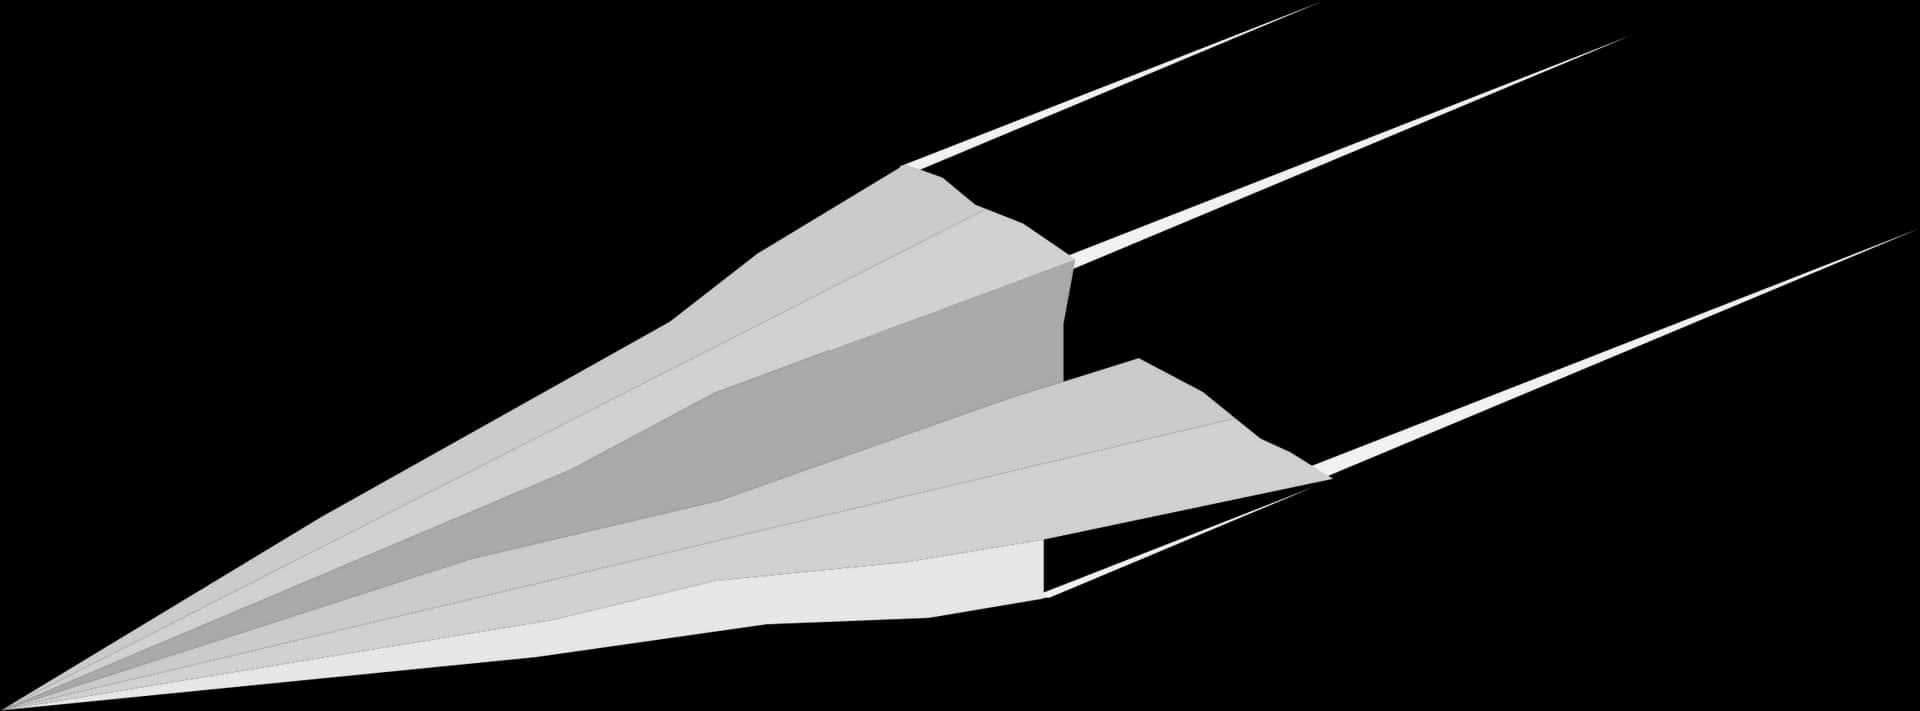 Abstract Paper Airplane Graphic PNG image